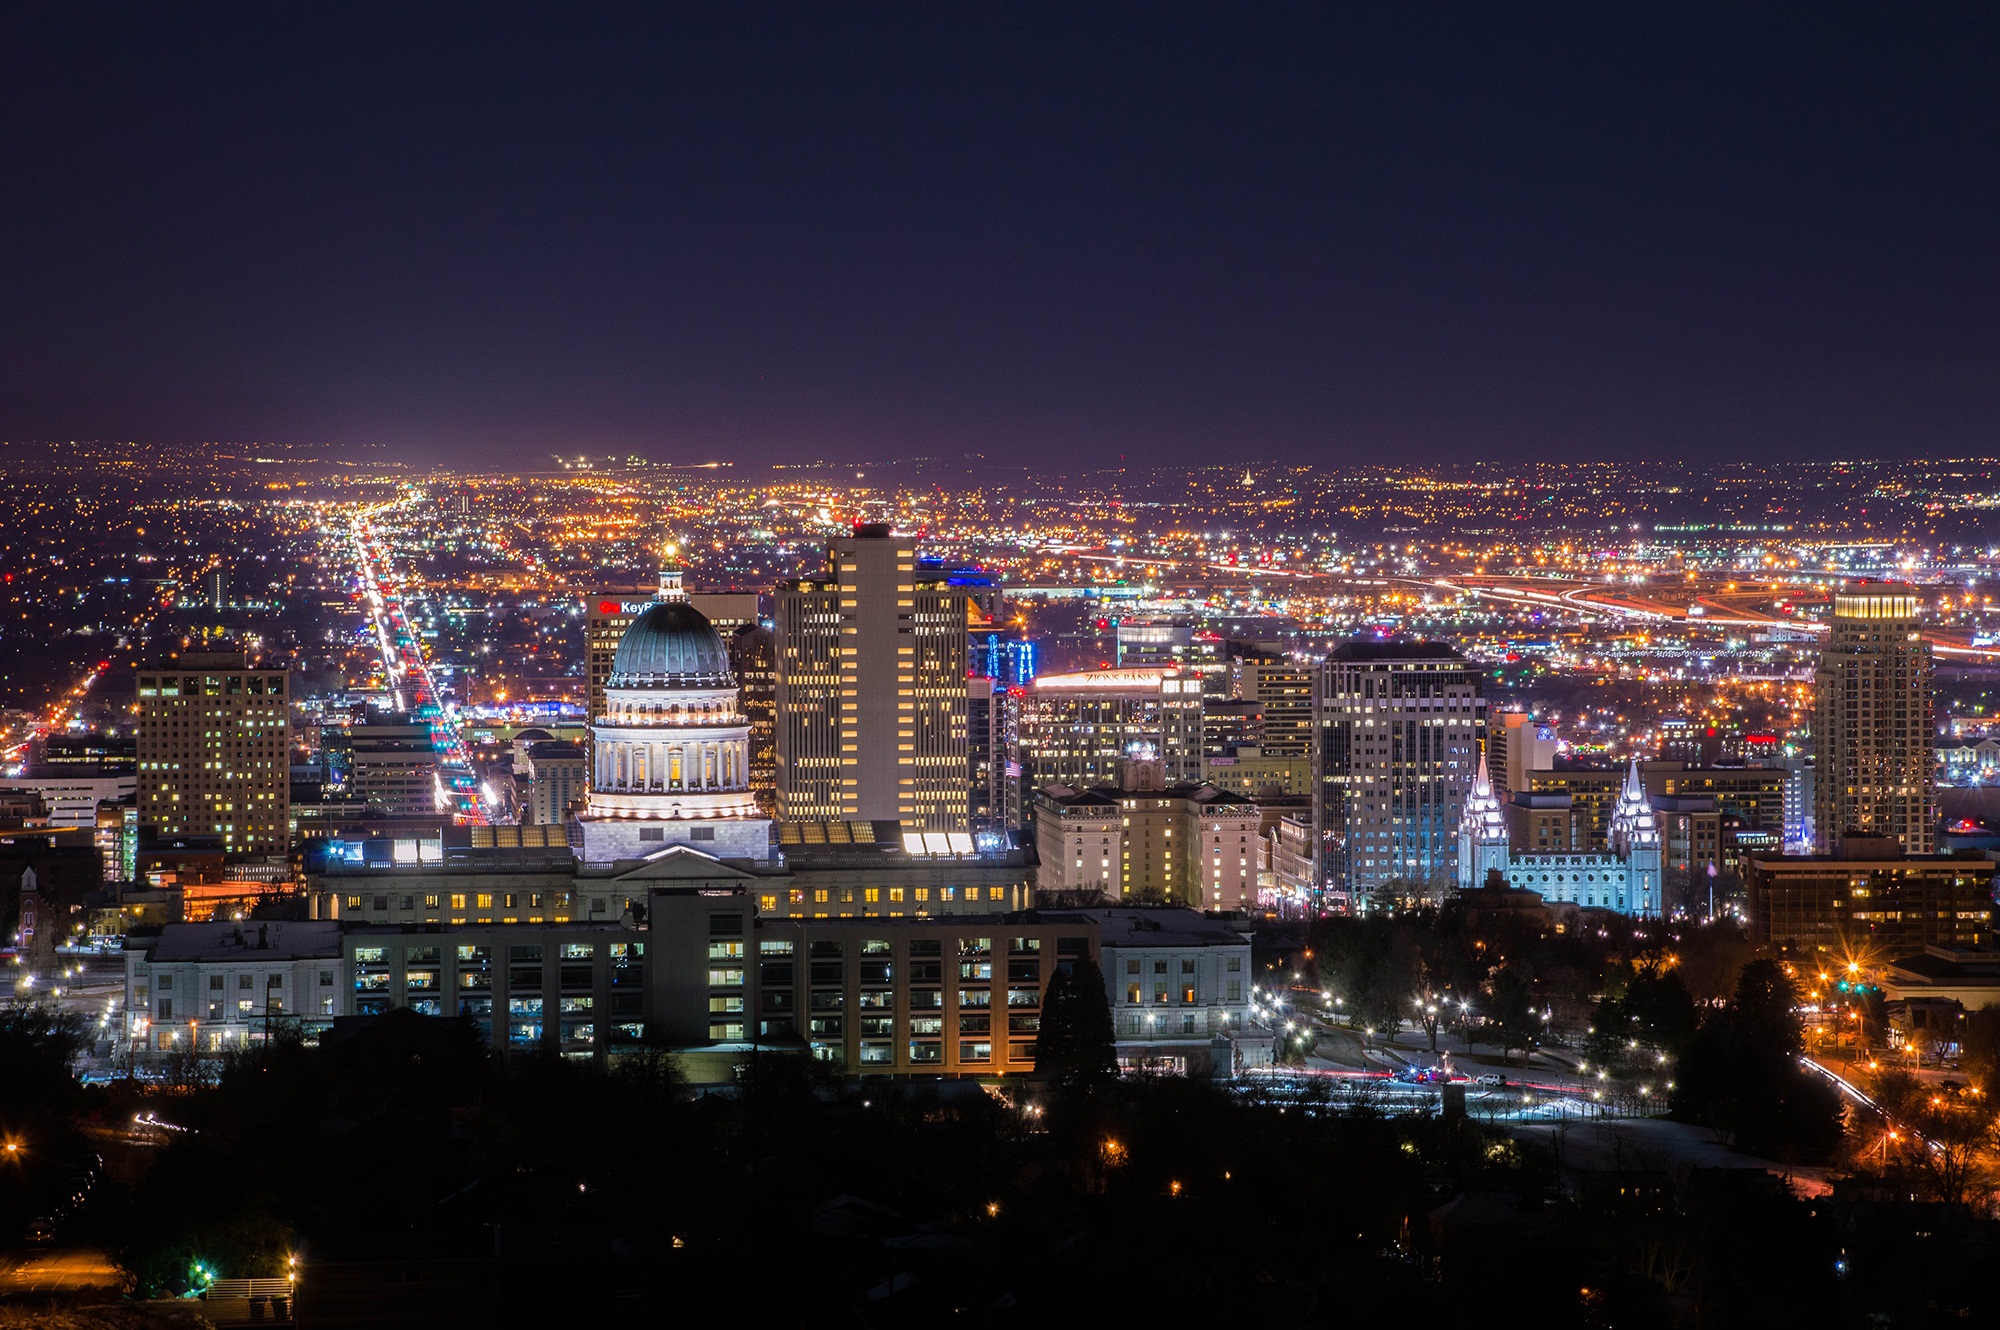 Salt Lake City, The Combination of Modernity and Adventure